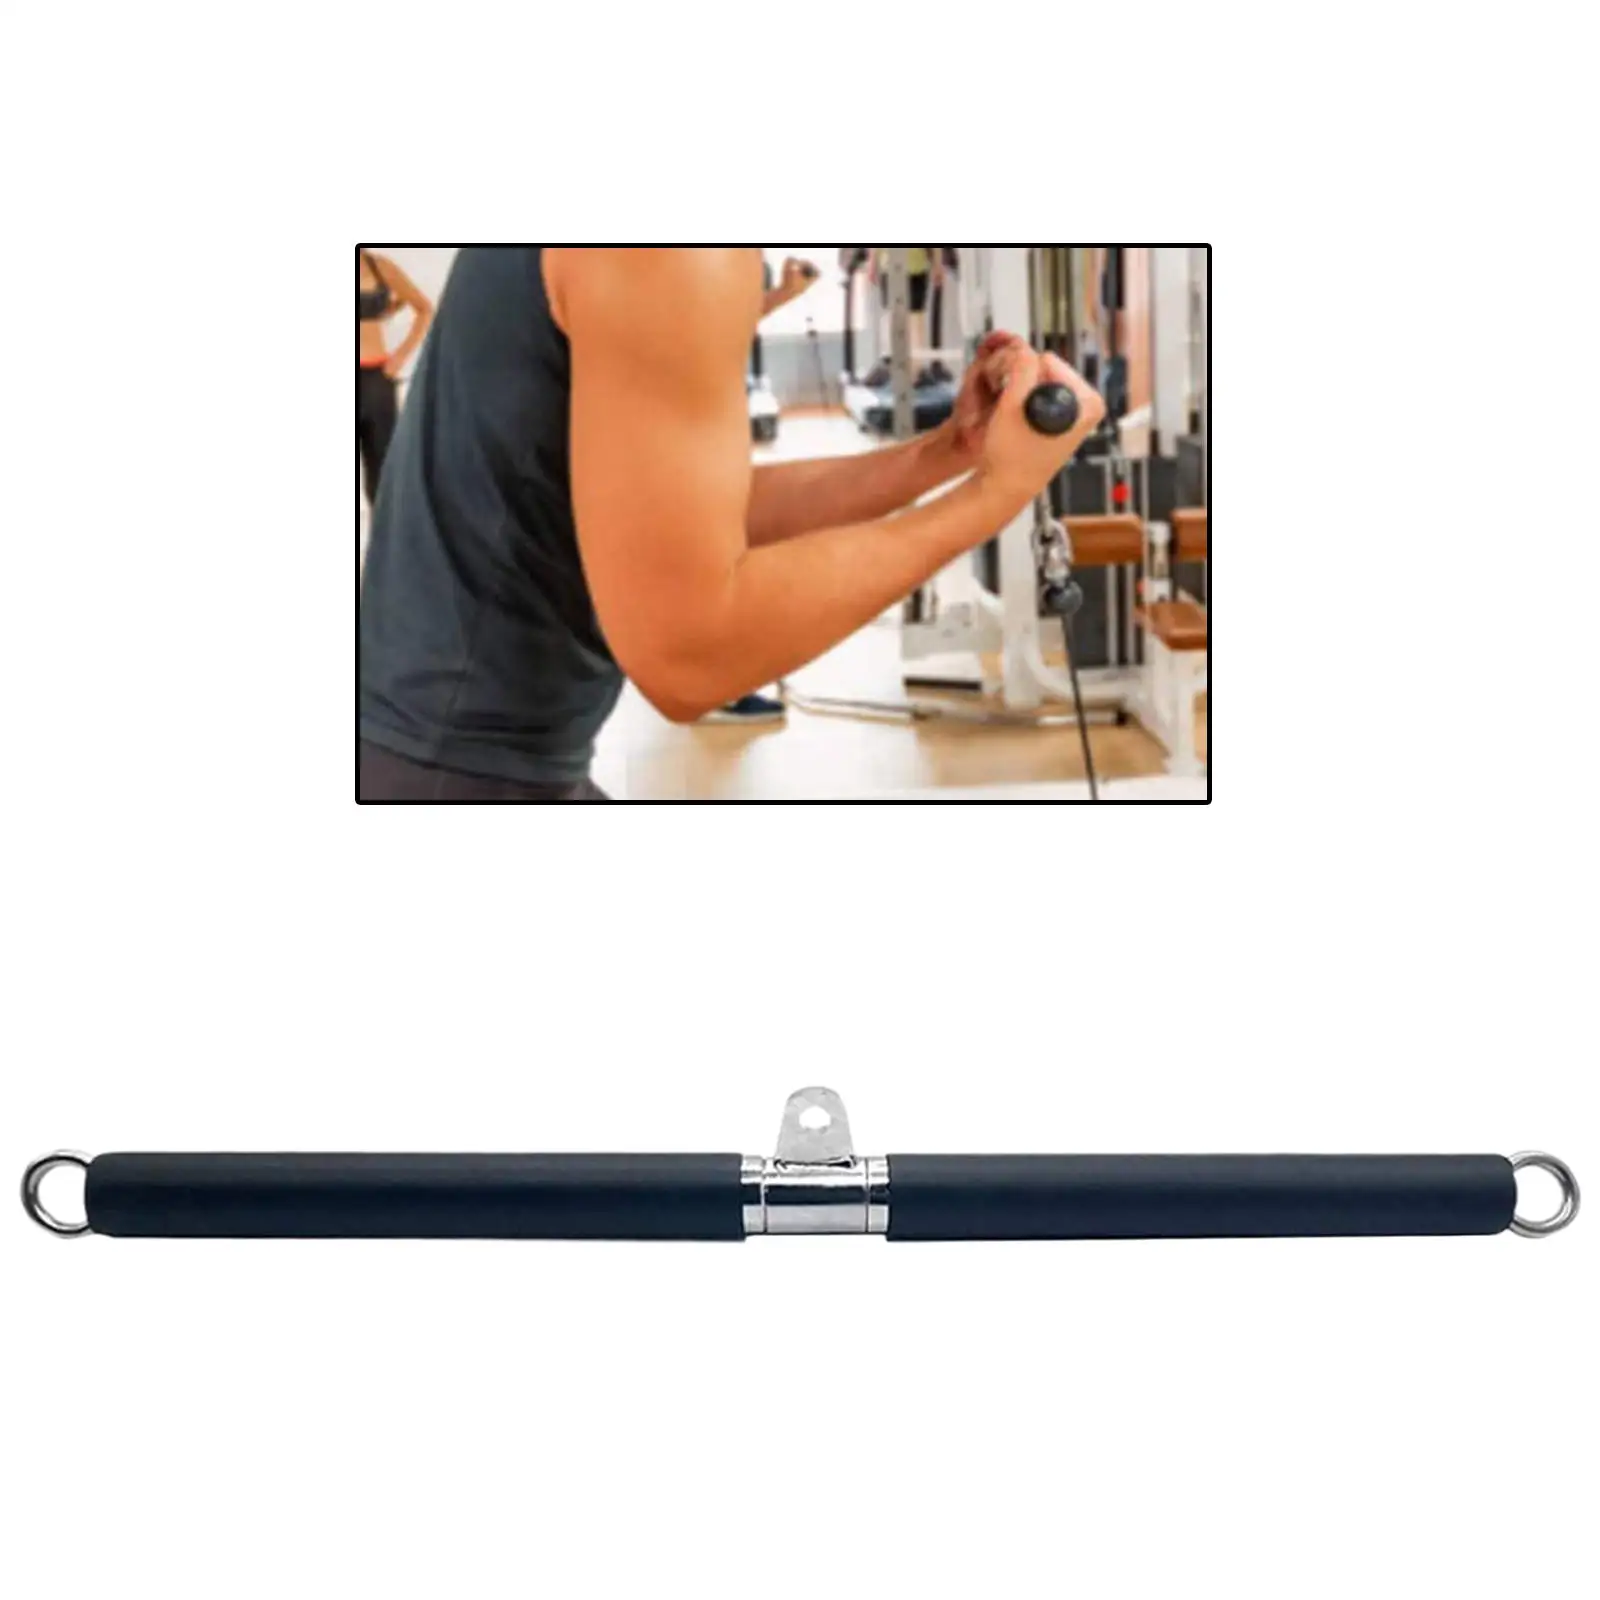 Fitness LAT Pulldown Bar LAT Bar Blaster Rope Non-Slip Handle Gym Cable Pull Down Bar for Gym Strength Workout Back Arm